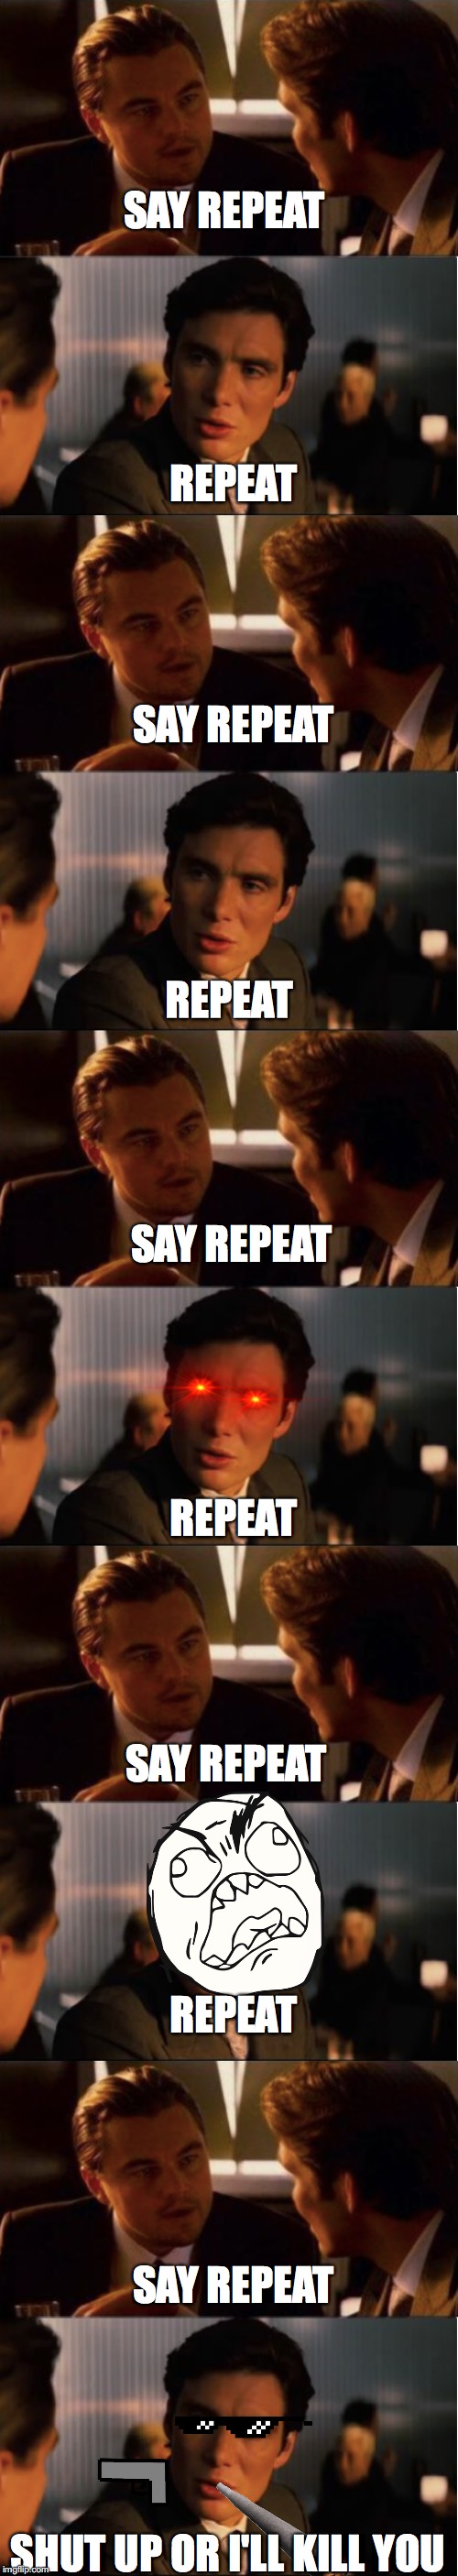 SAY REPEAT; REPEAT; SAY REPEAT; REPEAT; SAY REPEAT; REPEAT; SAY REPEAT; REPEAT; SAY REPEAT; SHUT UP OR I'LL KILL YOU | image tagged in inception | made w/ Imgflip meme maker